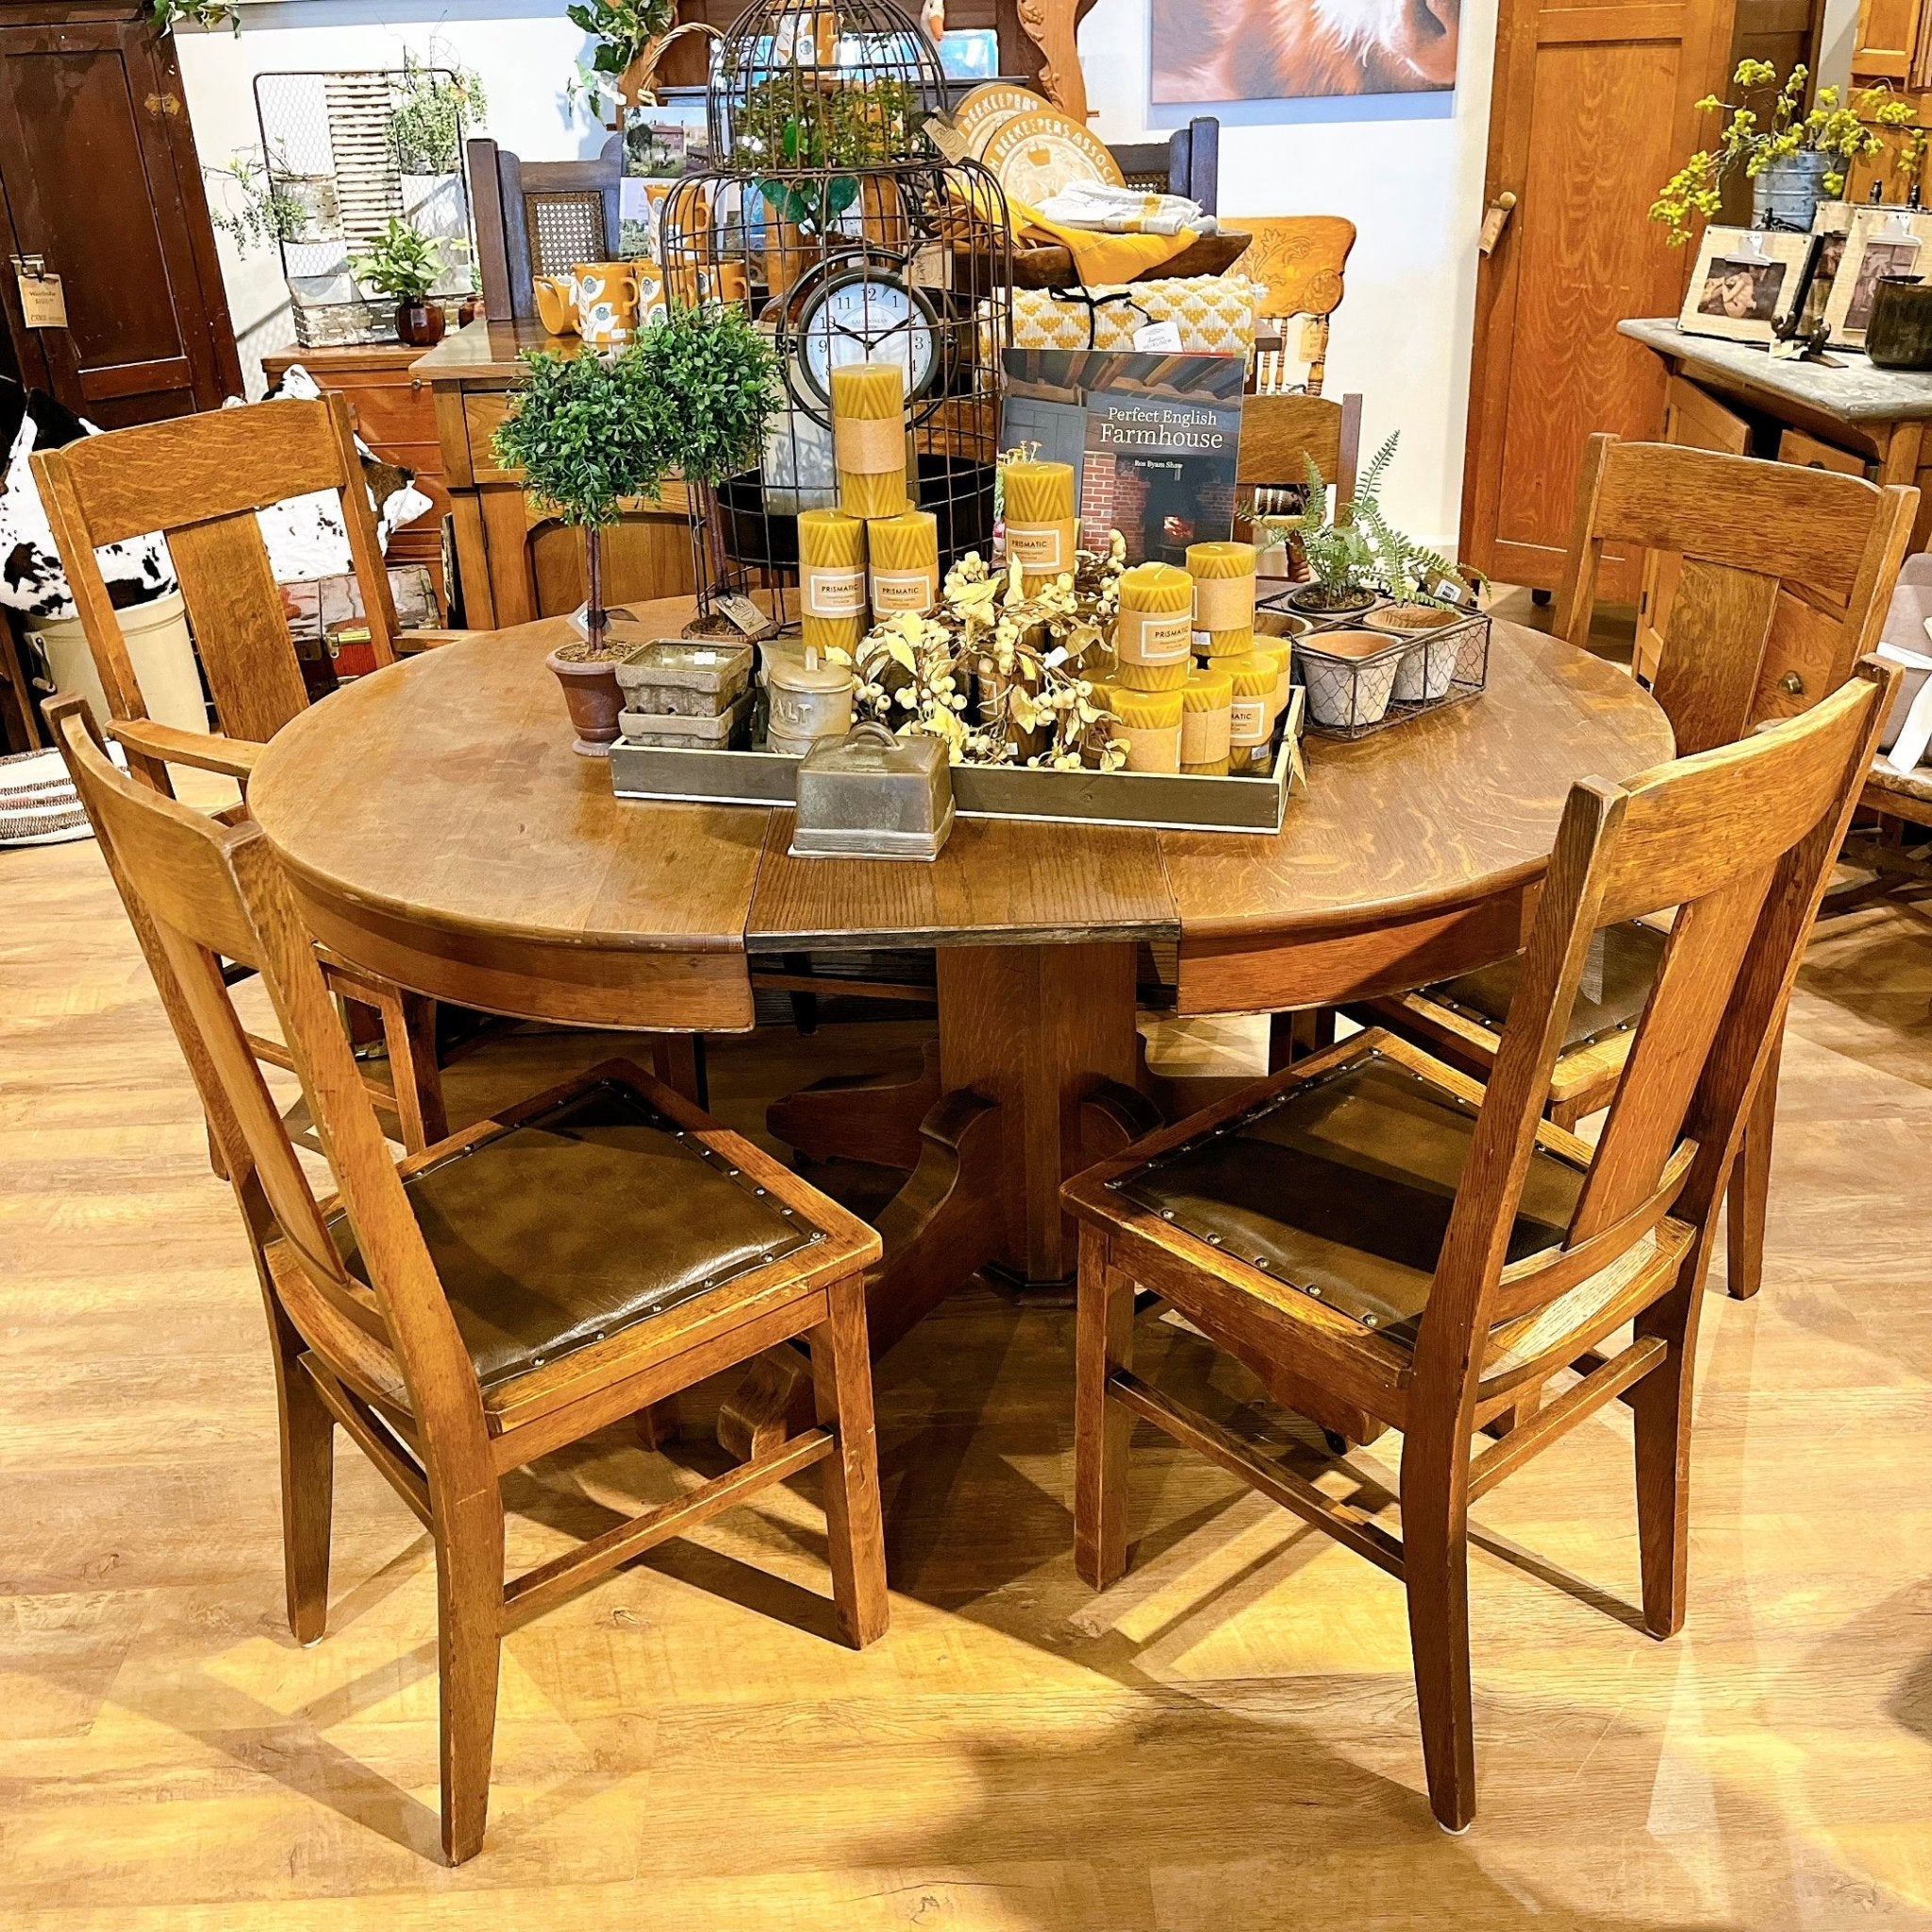 Round Oak Table With 6 Chairs